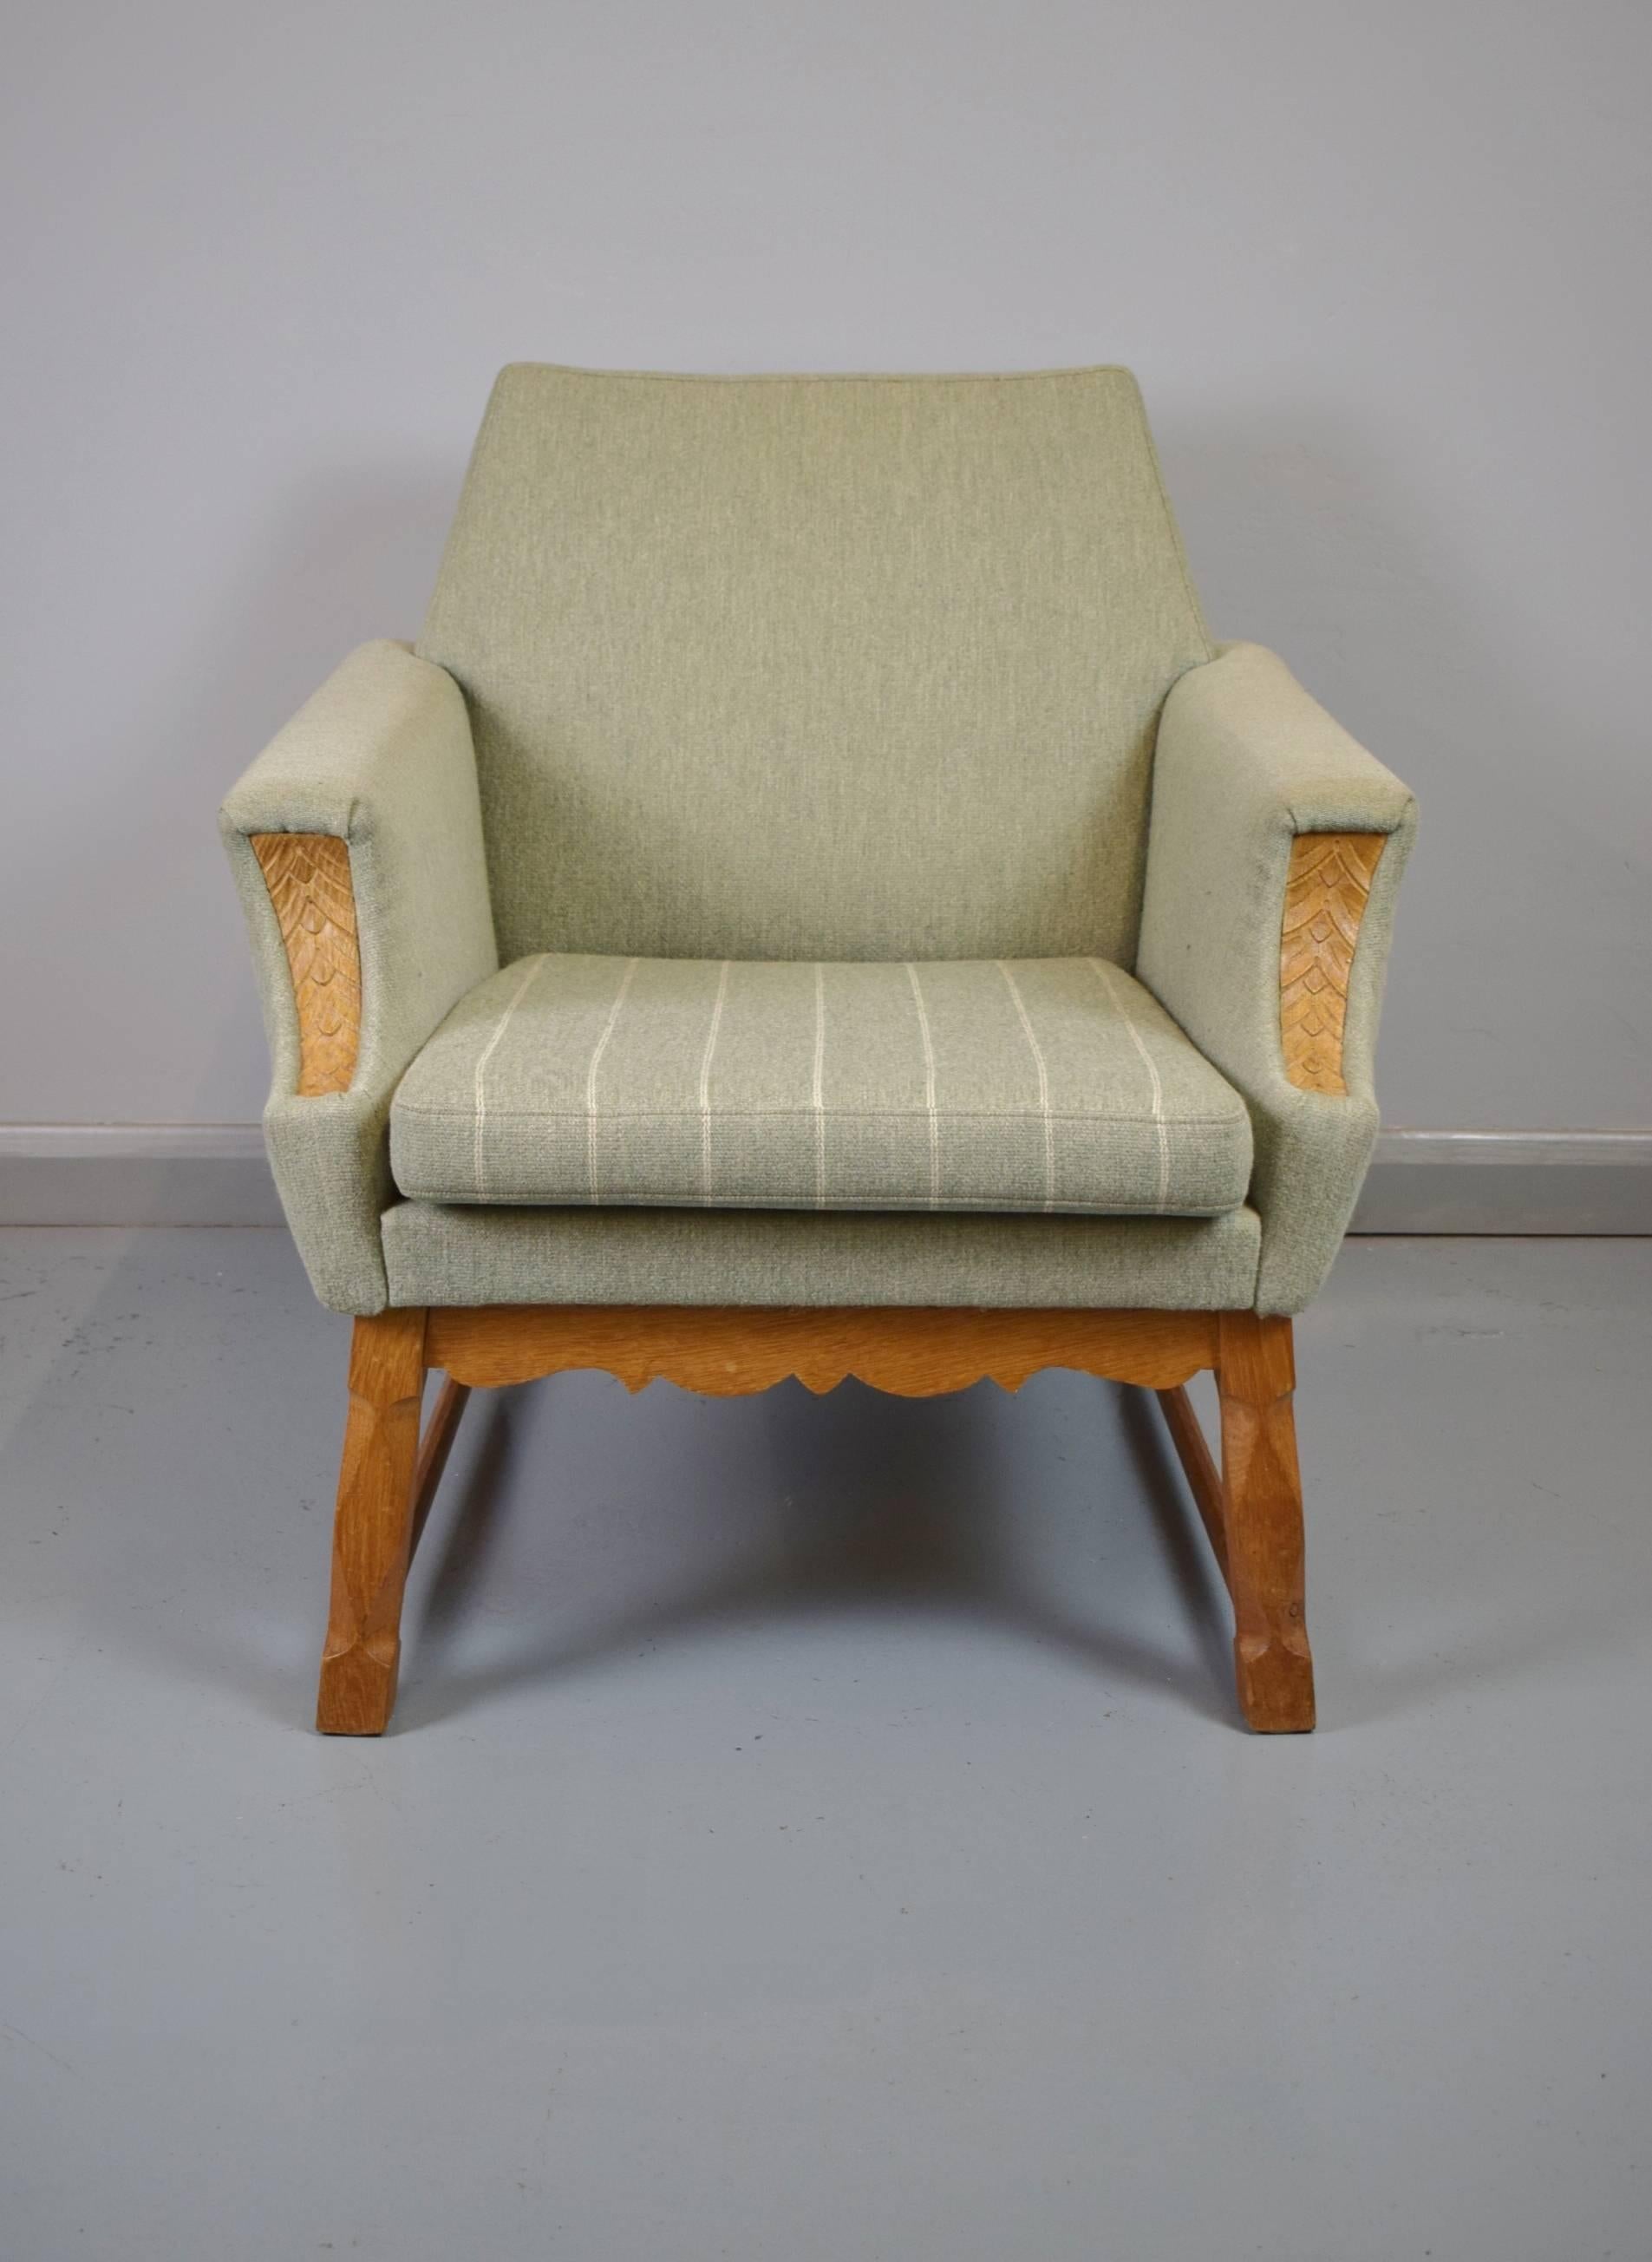 20th Century Mid-Century Retro Danish Lounge Armchair and Footstool Oak Frame, 1950s-1960s For Sale